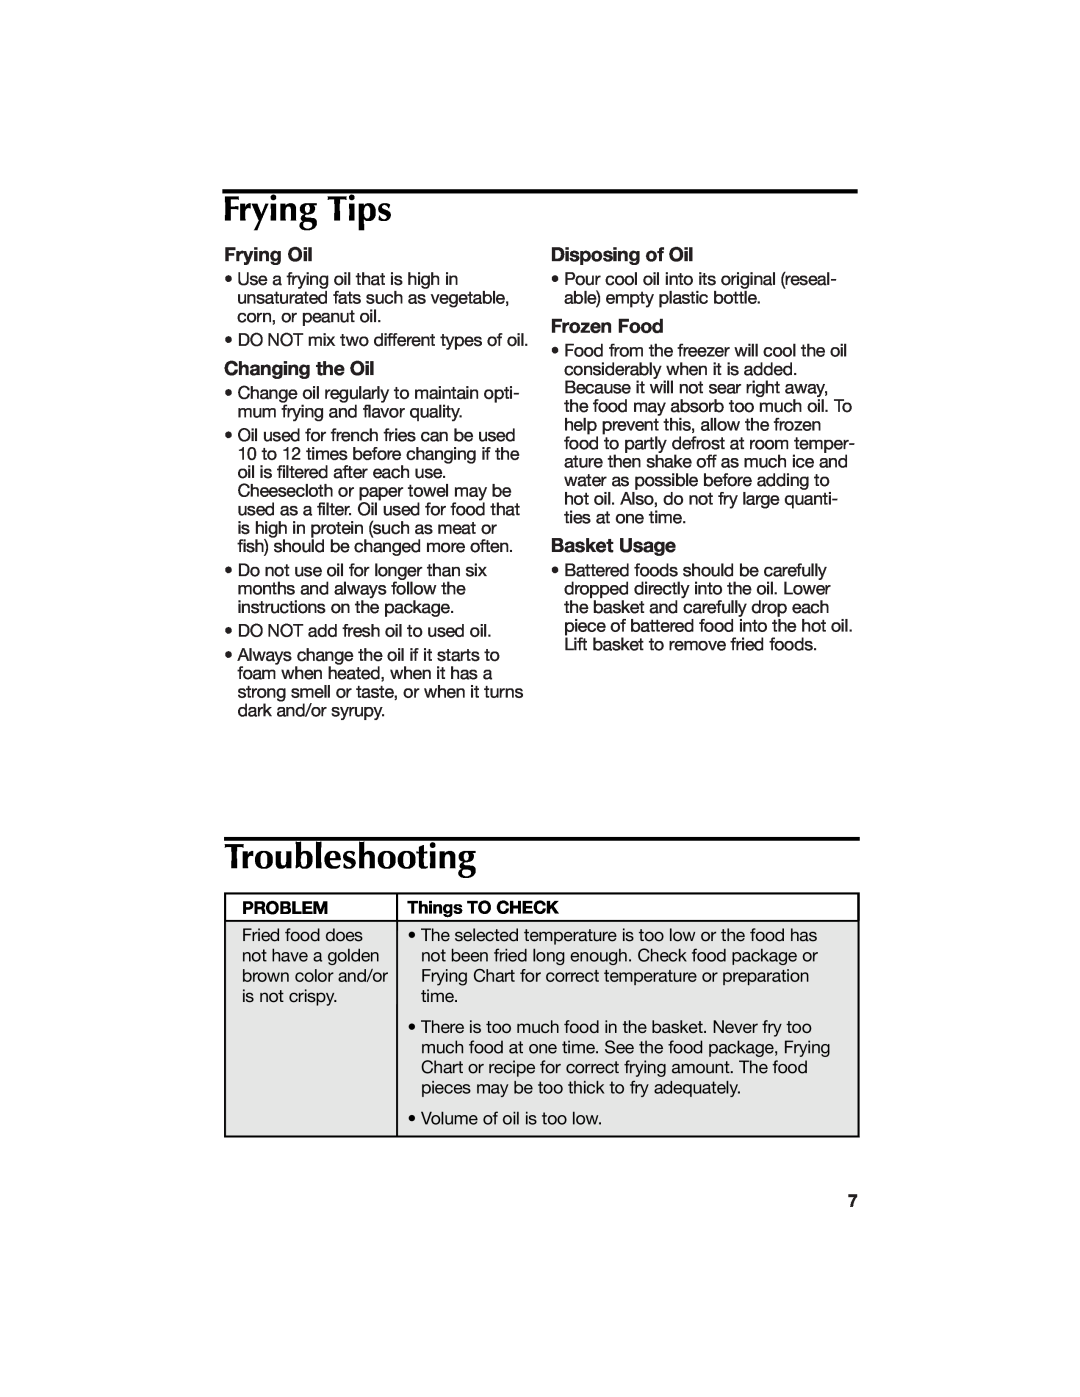 Hamilton Beach 840113900 manual Frying Tips, Troubleshooting, Frying Oil, Changing the Oil, Disposing of Oil, Frozen Food 